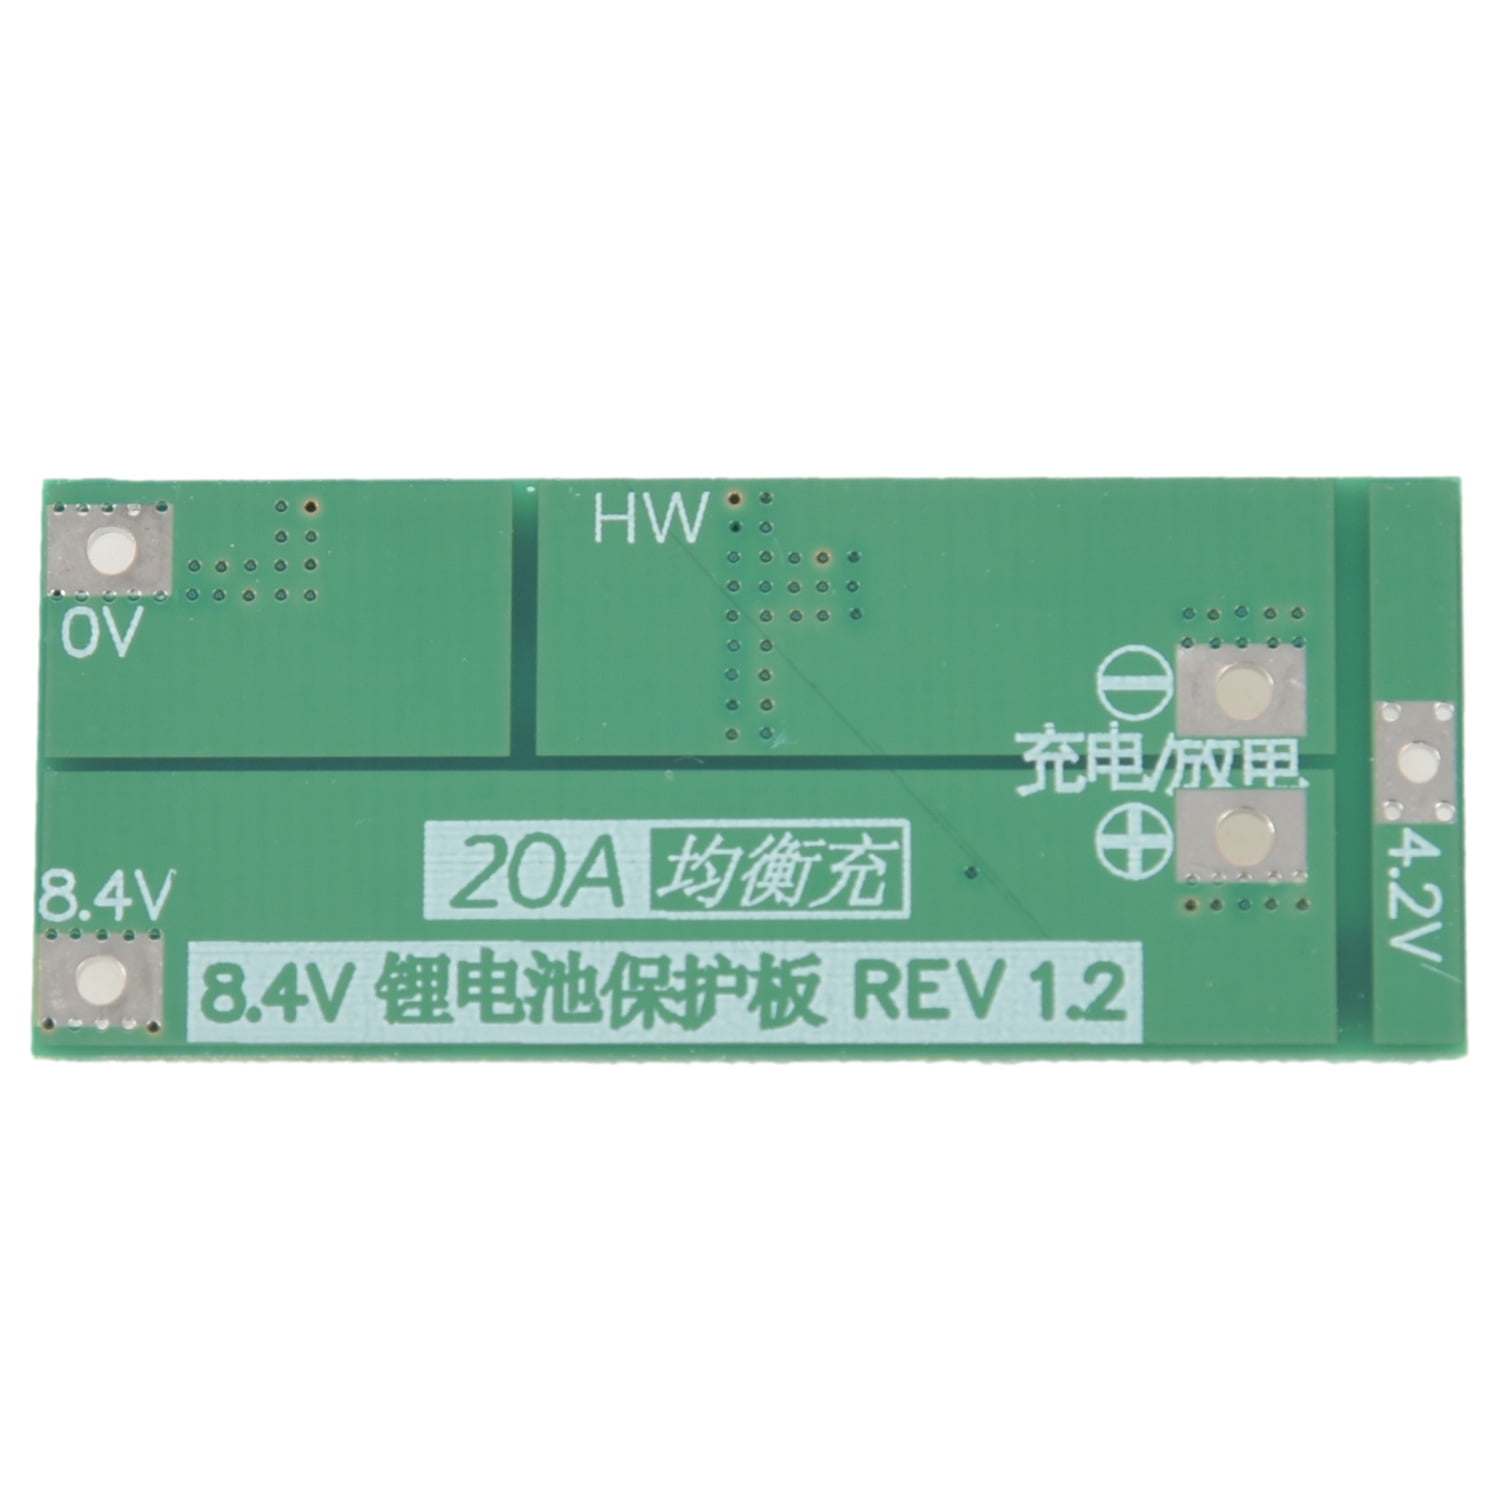 10 A 7.4V BMS PCB Protection Board 18650 Lithium Li-ion Battery Cell TOP 2S 8 